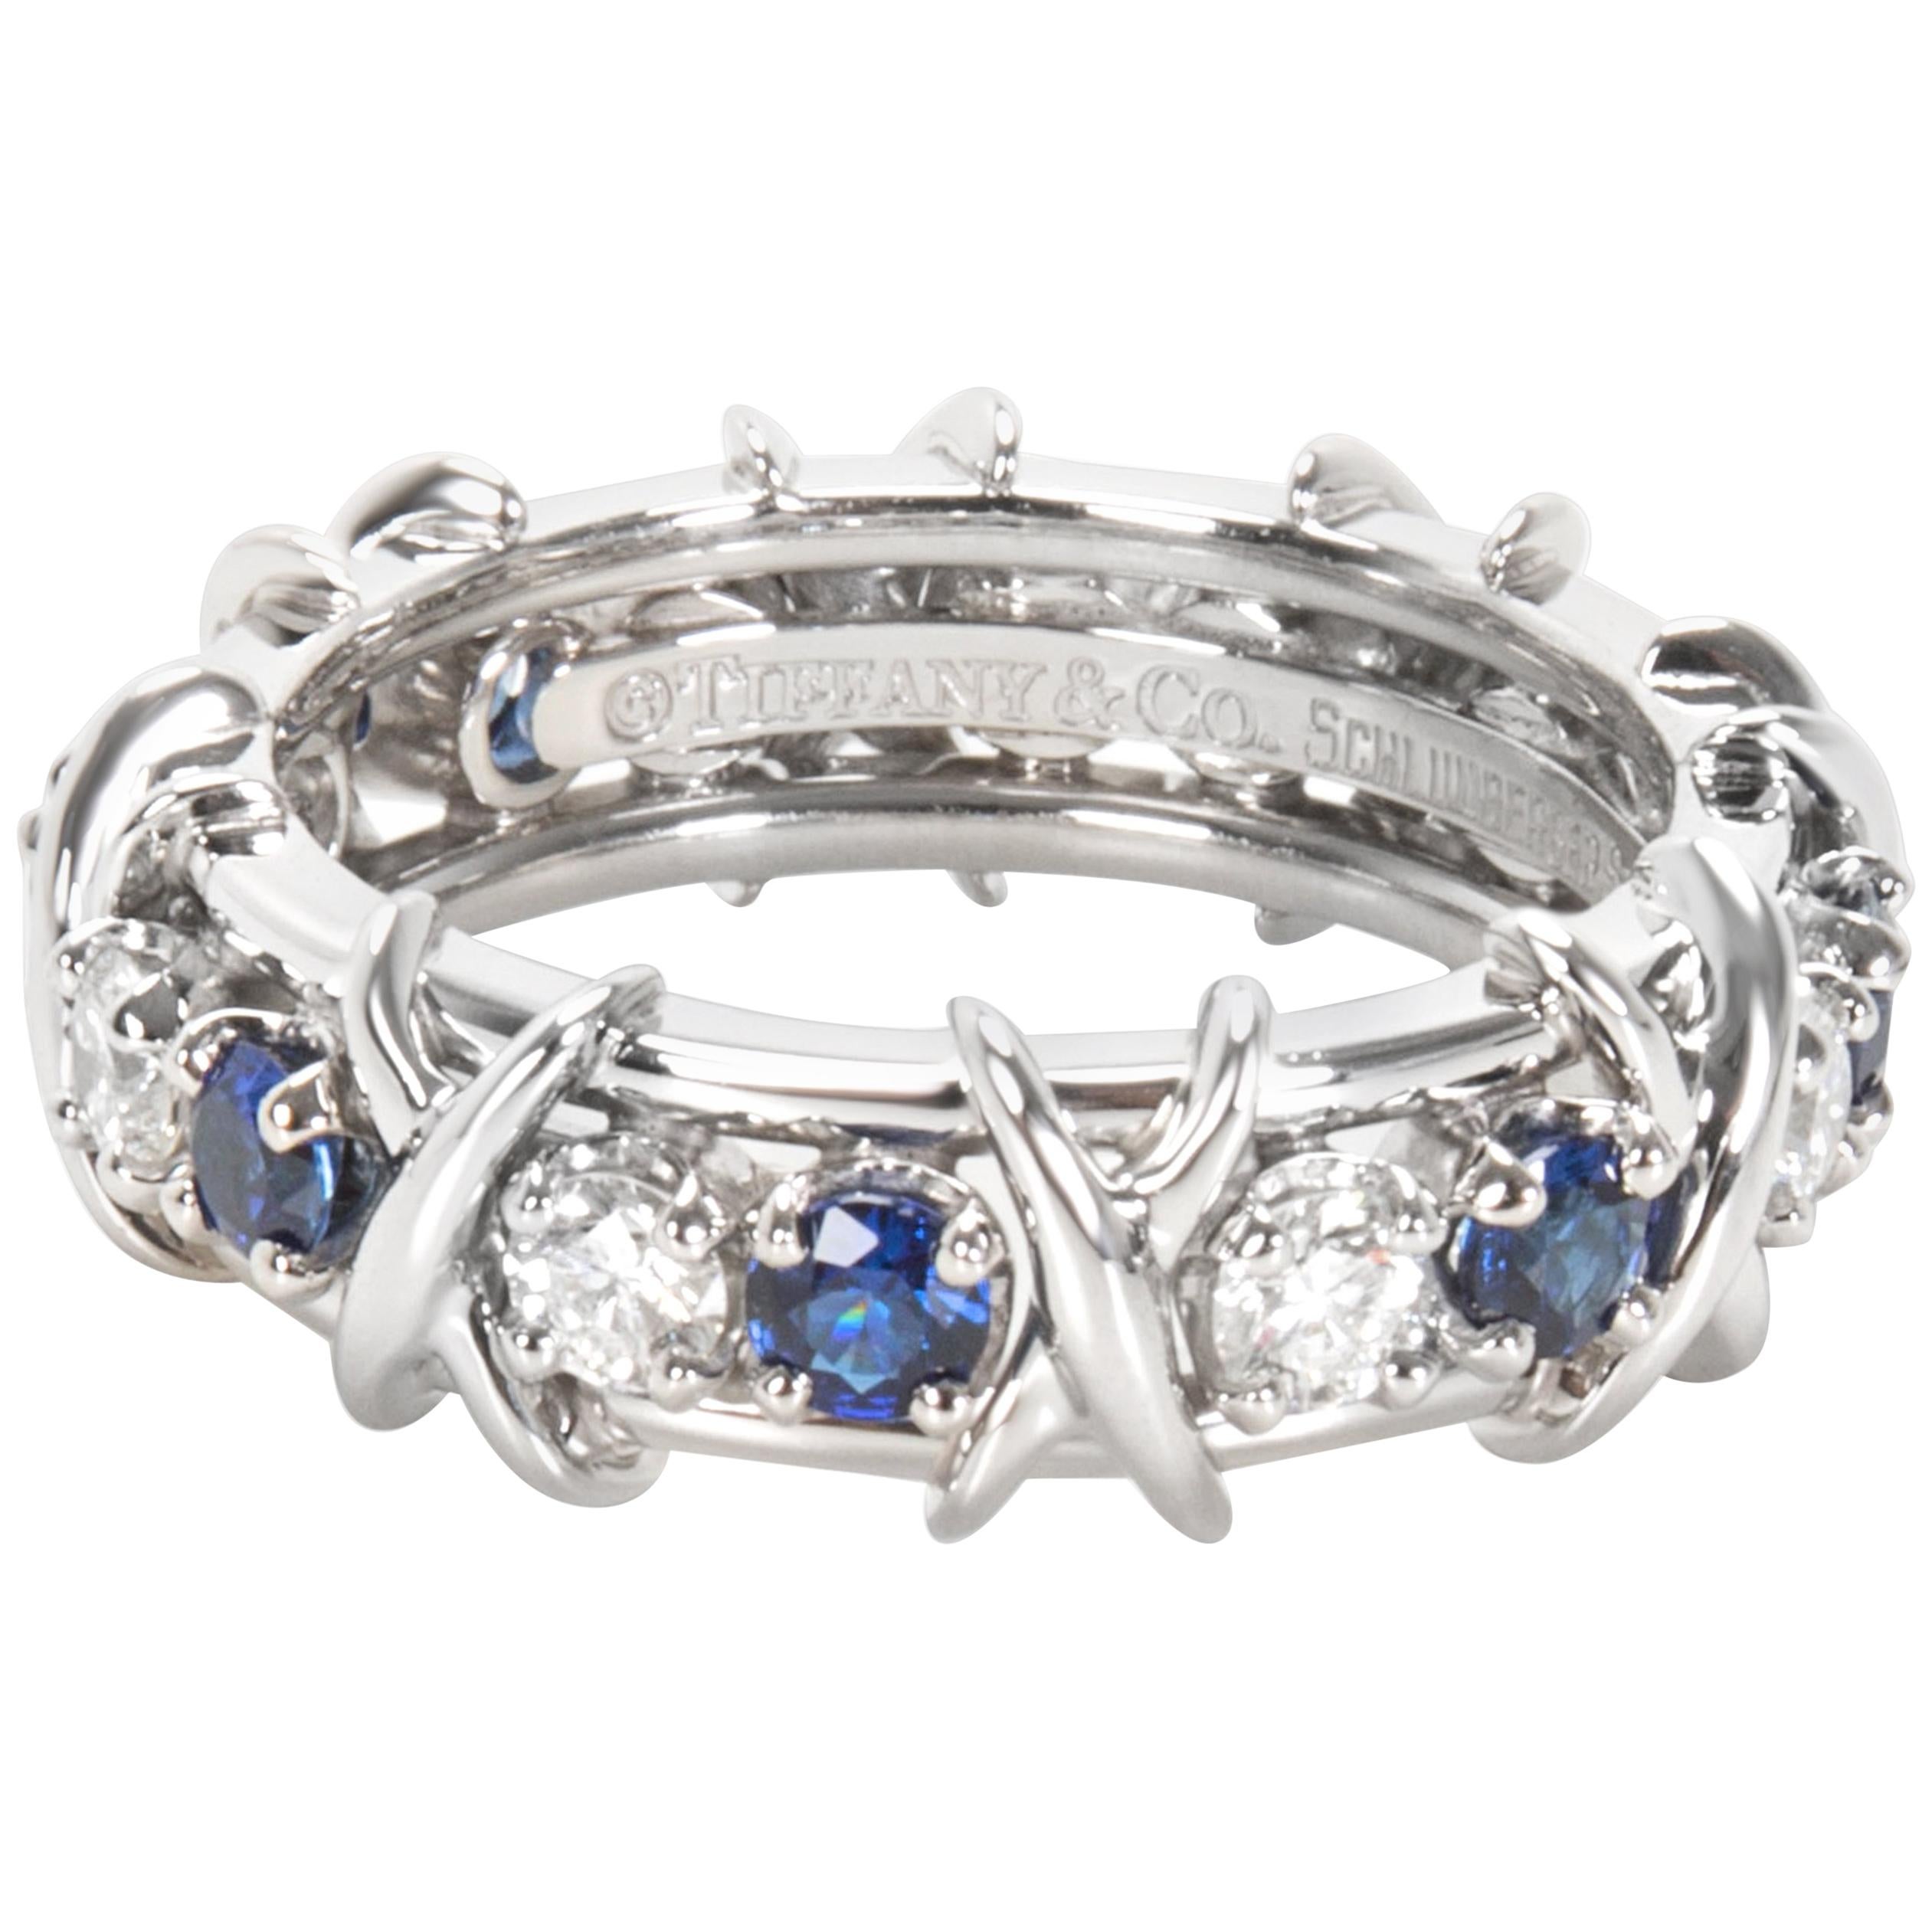 Tiffany & Co. Schlumberger Diamond and Sapphire Eternity Ring in Platinum